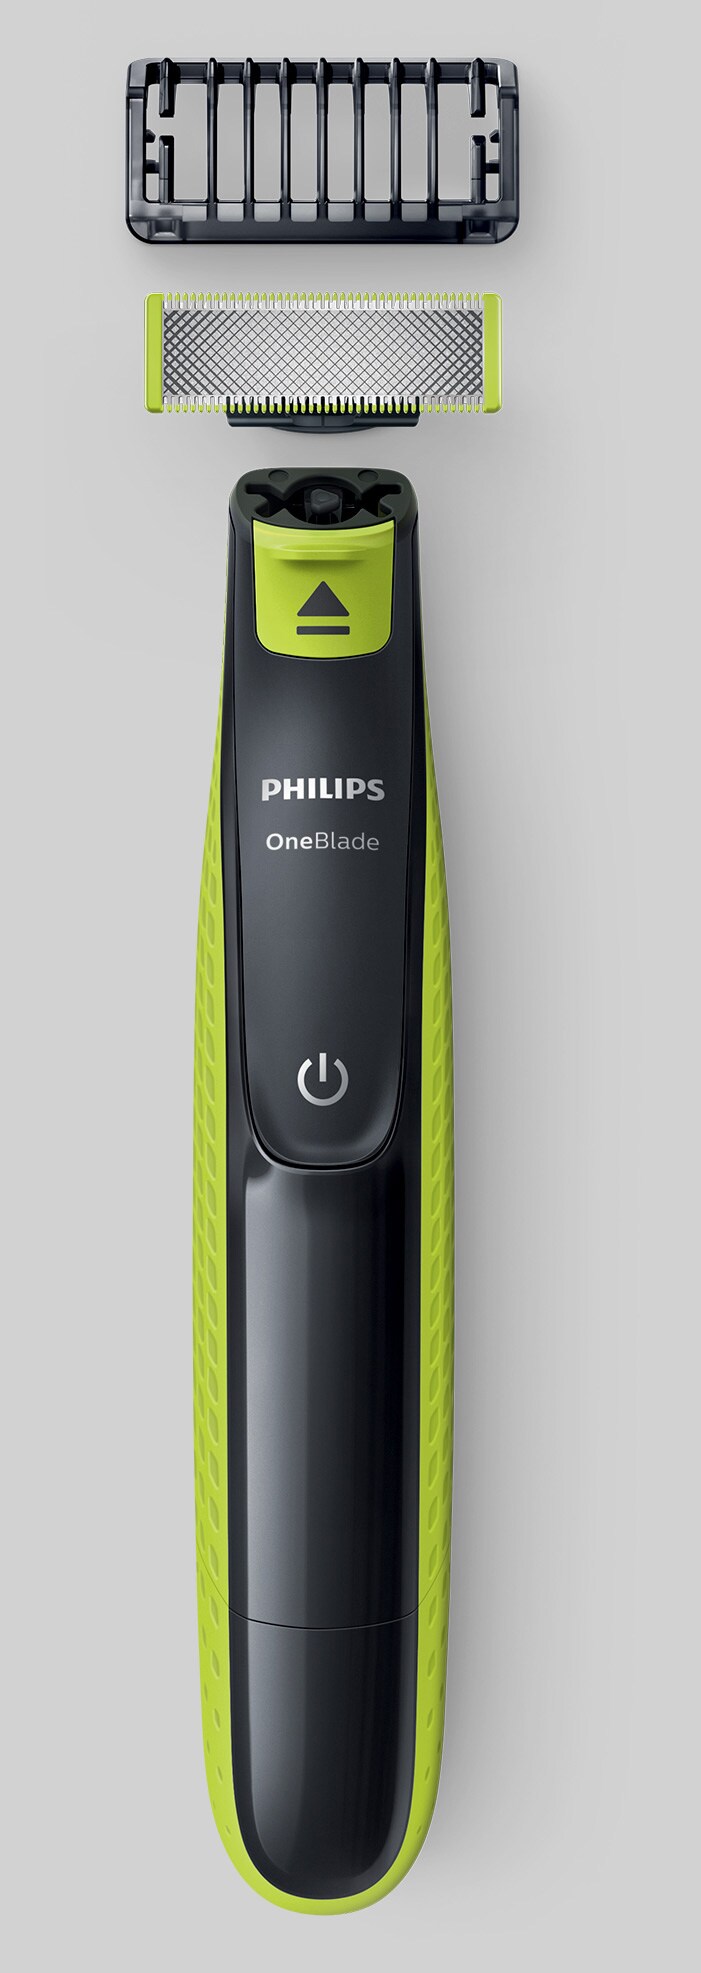 my one blade philips